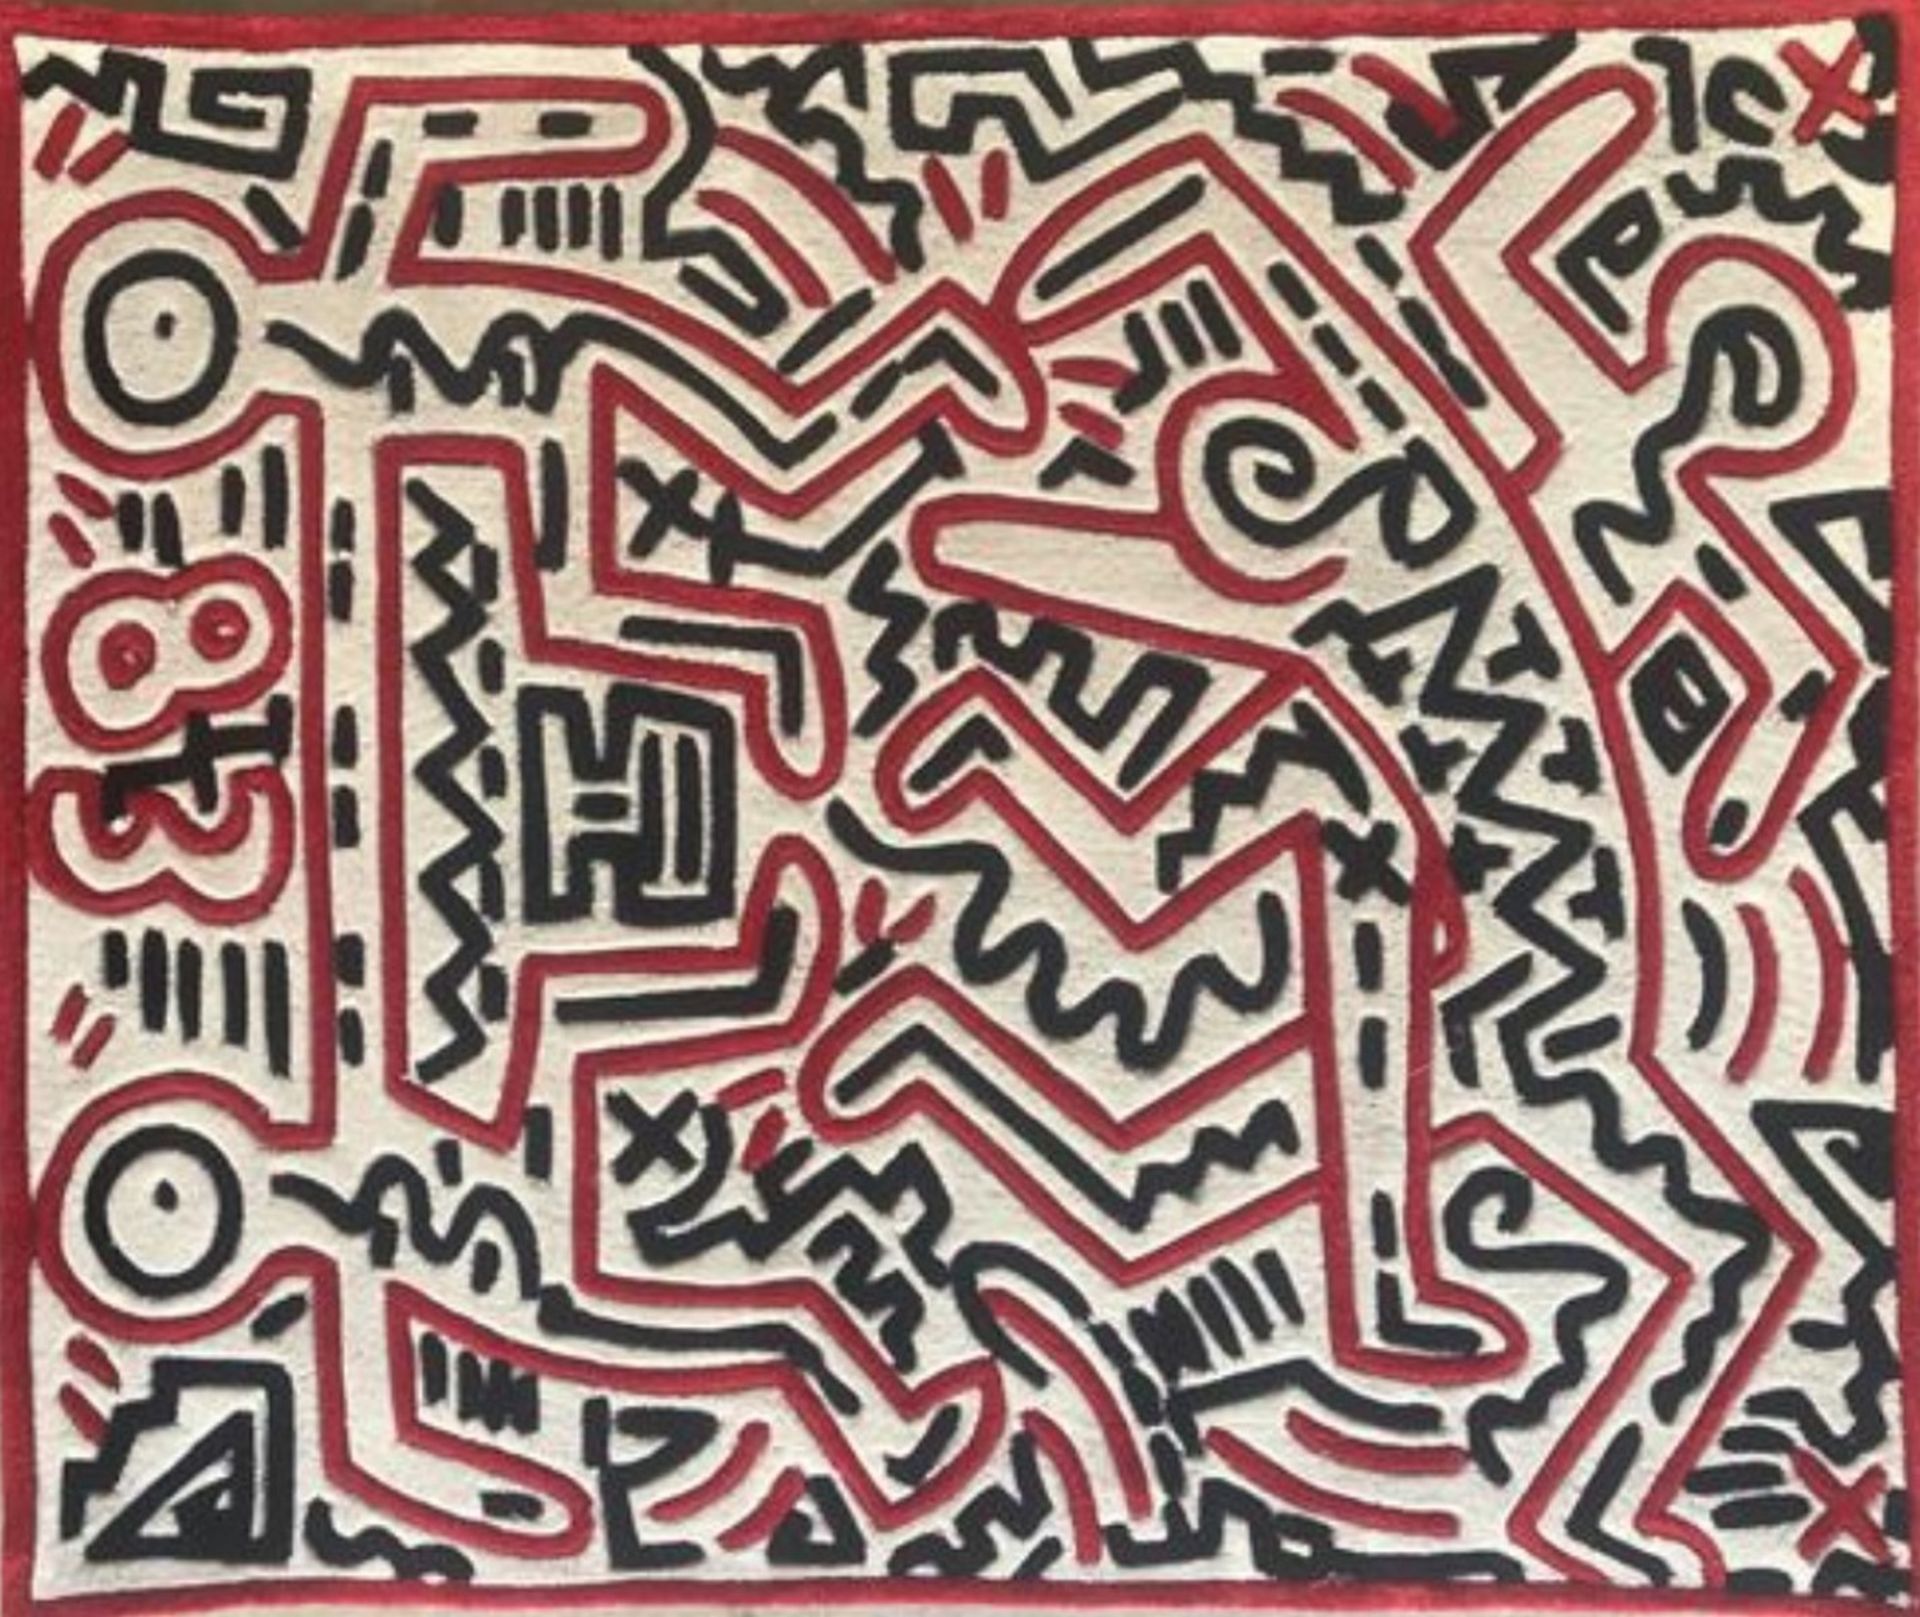 Keith HARING, D’Après